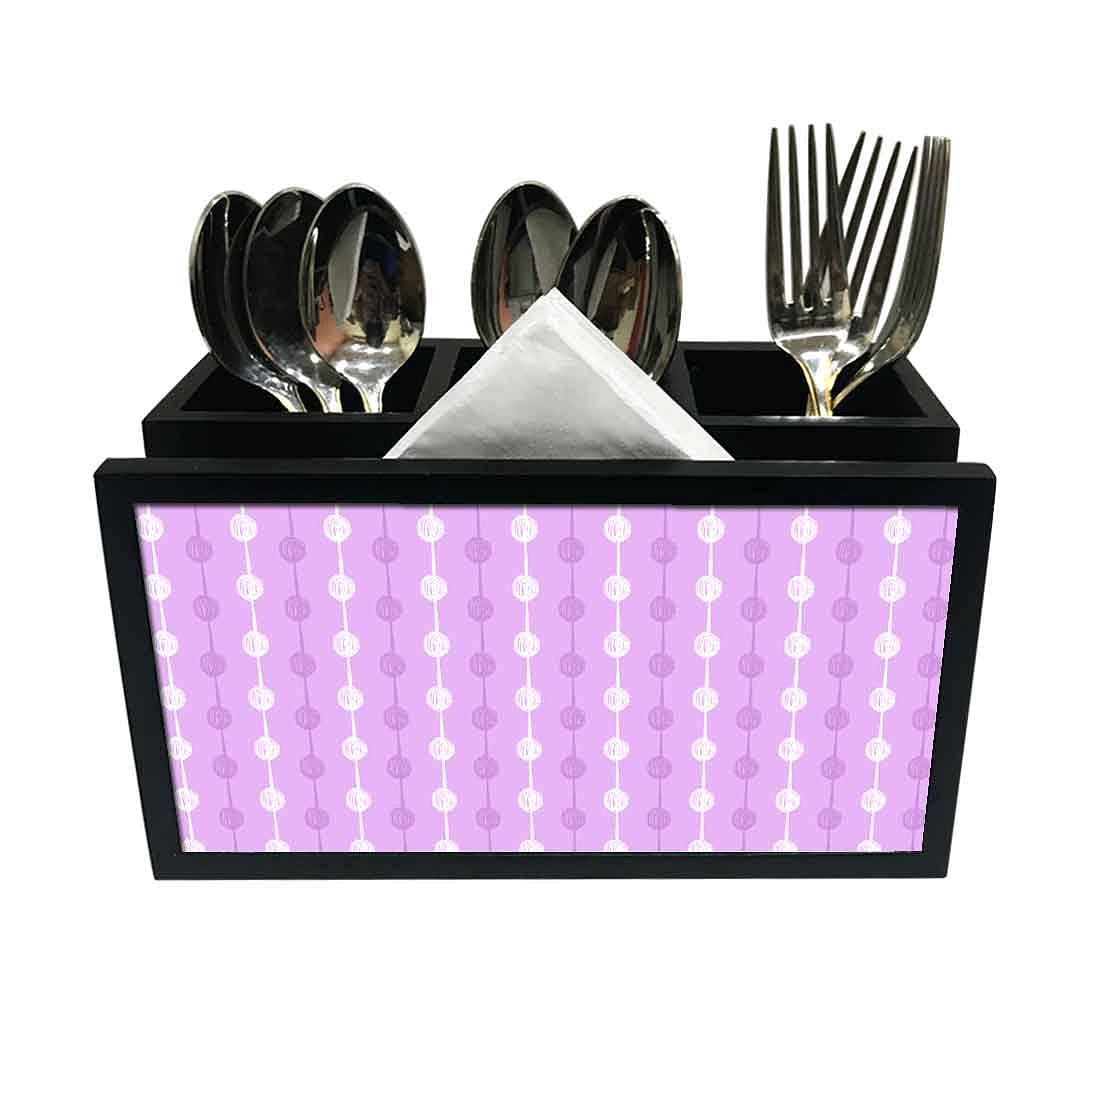 Cutlery Tissue Holder Napkin Stand -  White and Purple Dots Line Nutcase